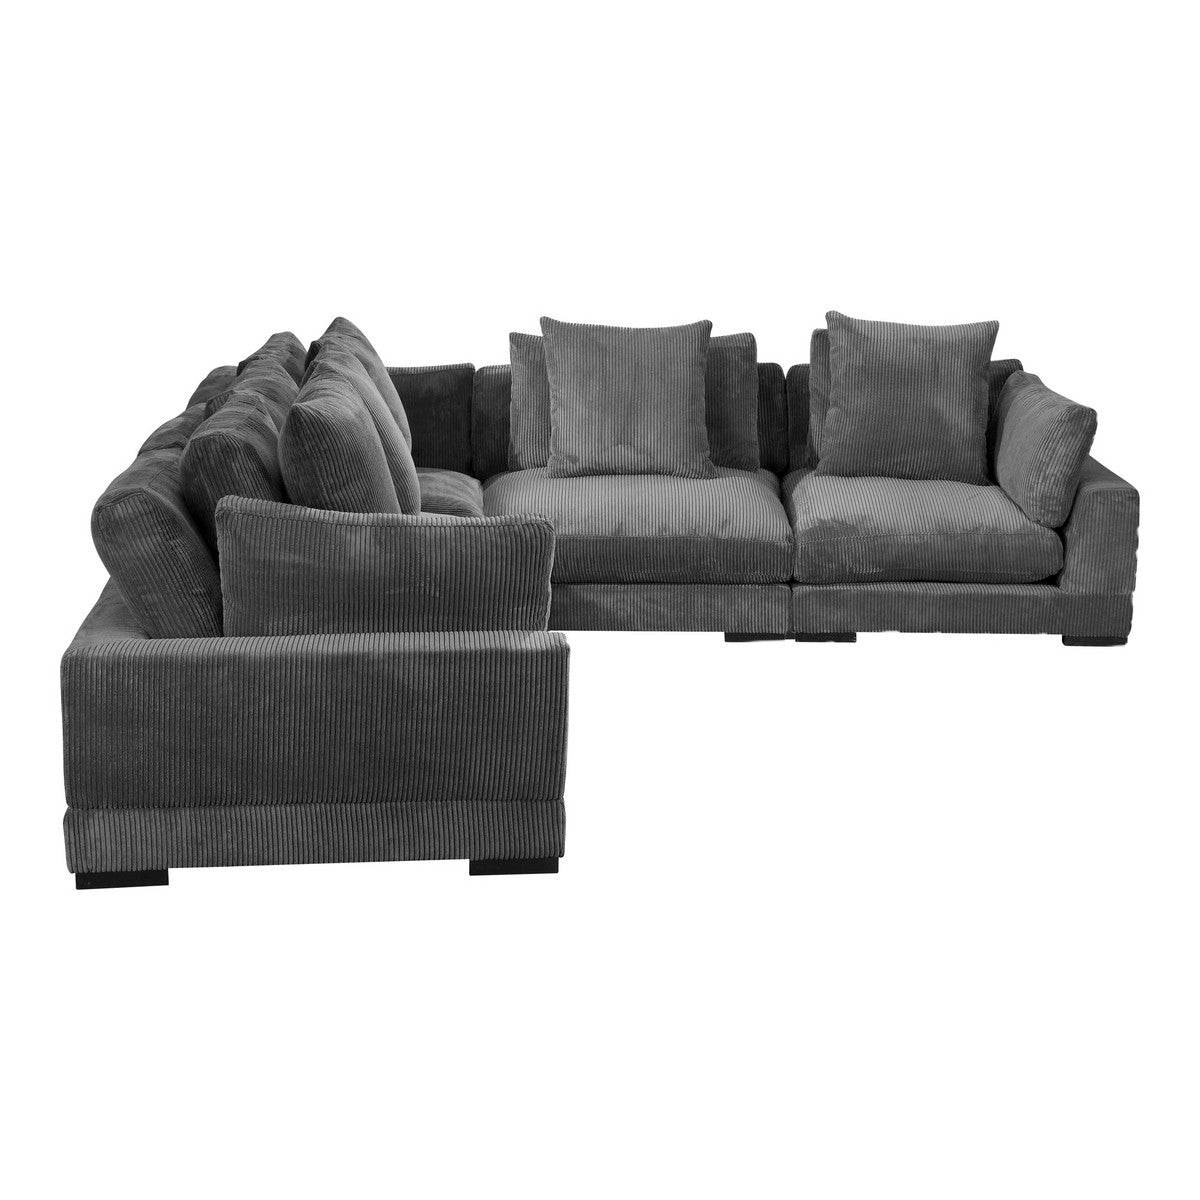 Moe's Home Collection Tumble Classic L Modular Sectional Charcoal - UB-1014-25